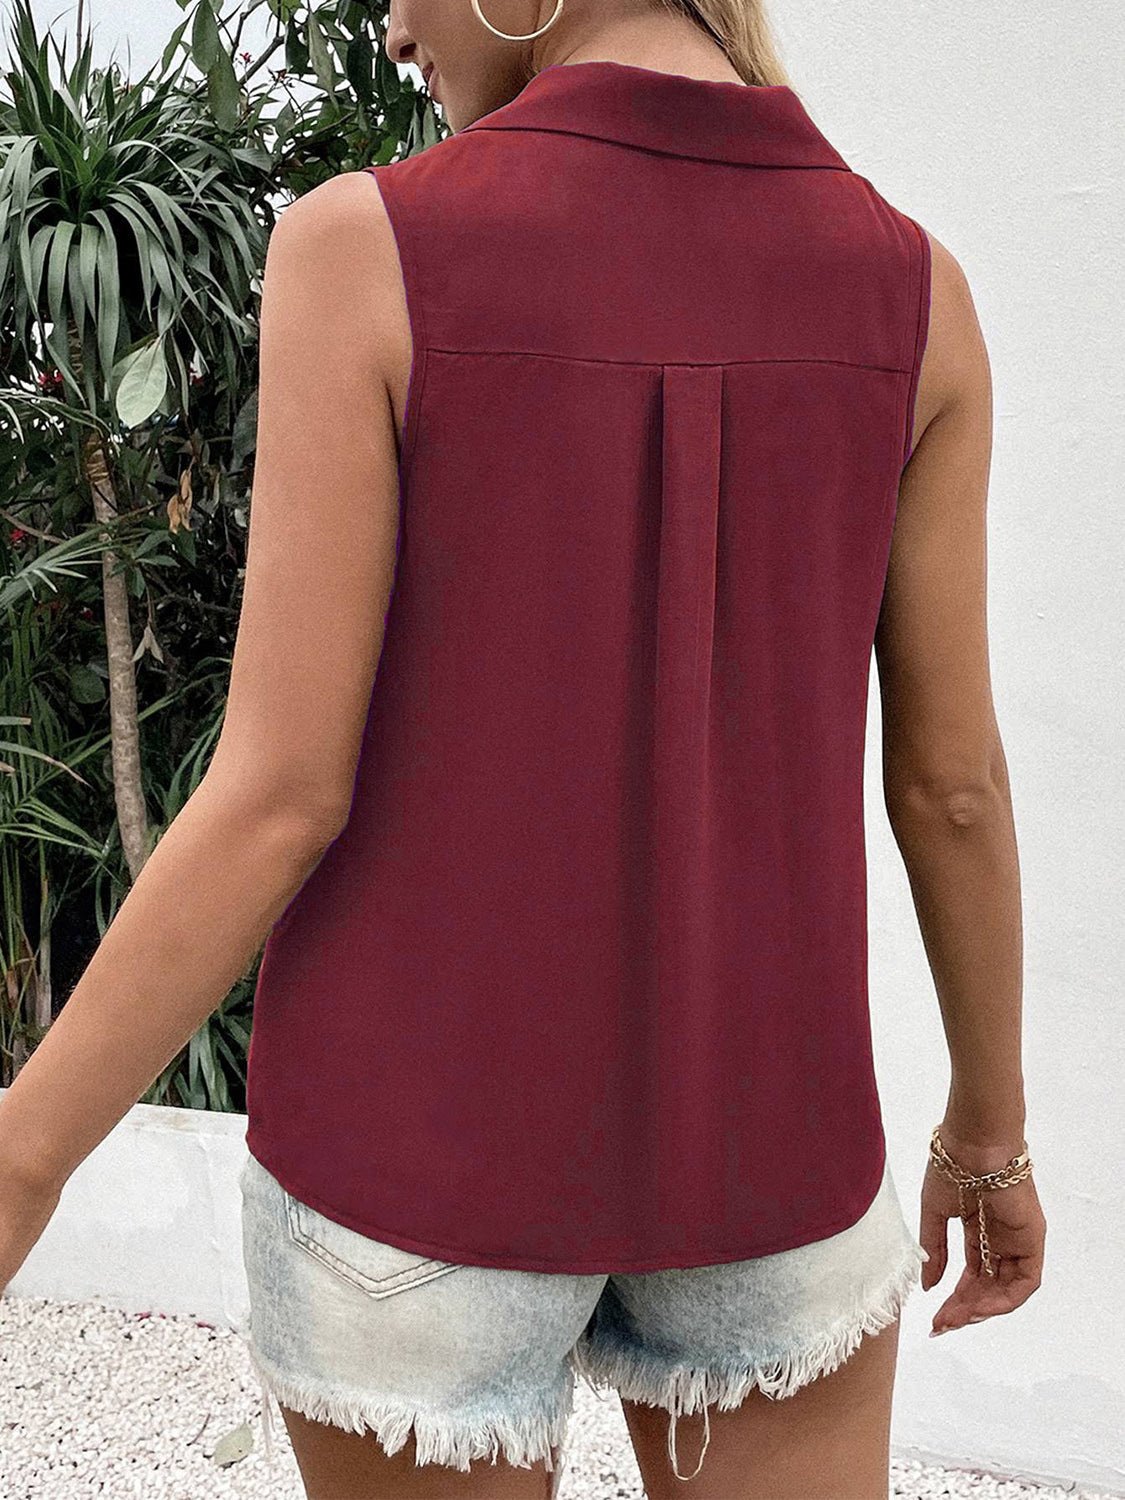 Johnny Collar Button Up Tank *5 colors*